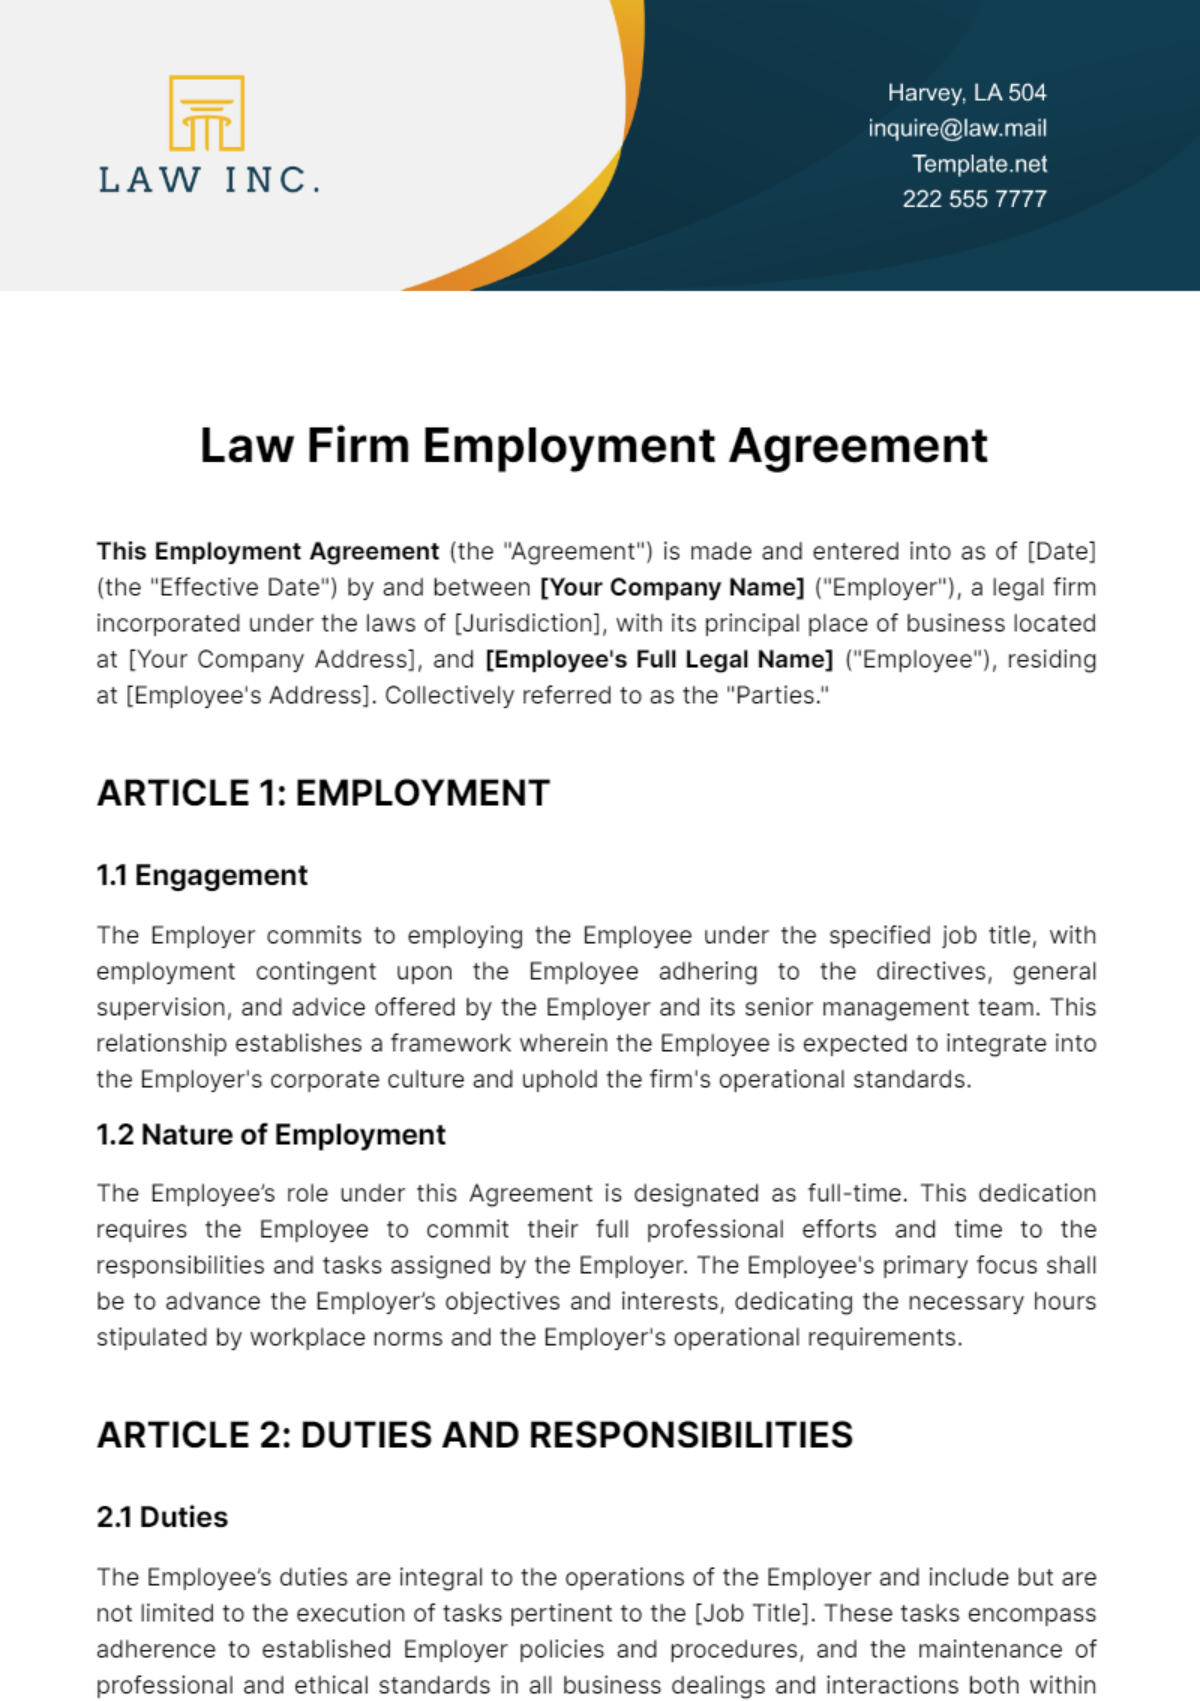 Free Law Firm Employment Agreement Template